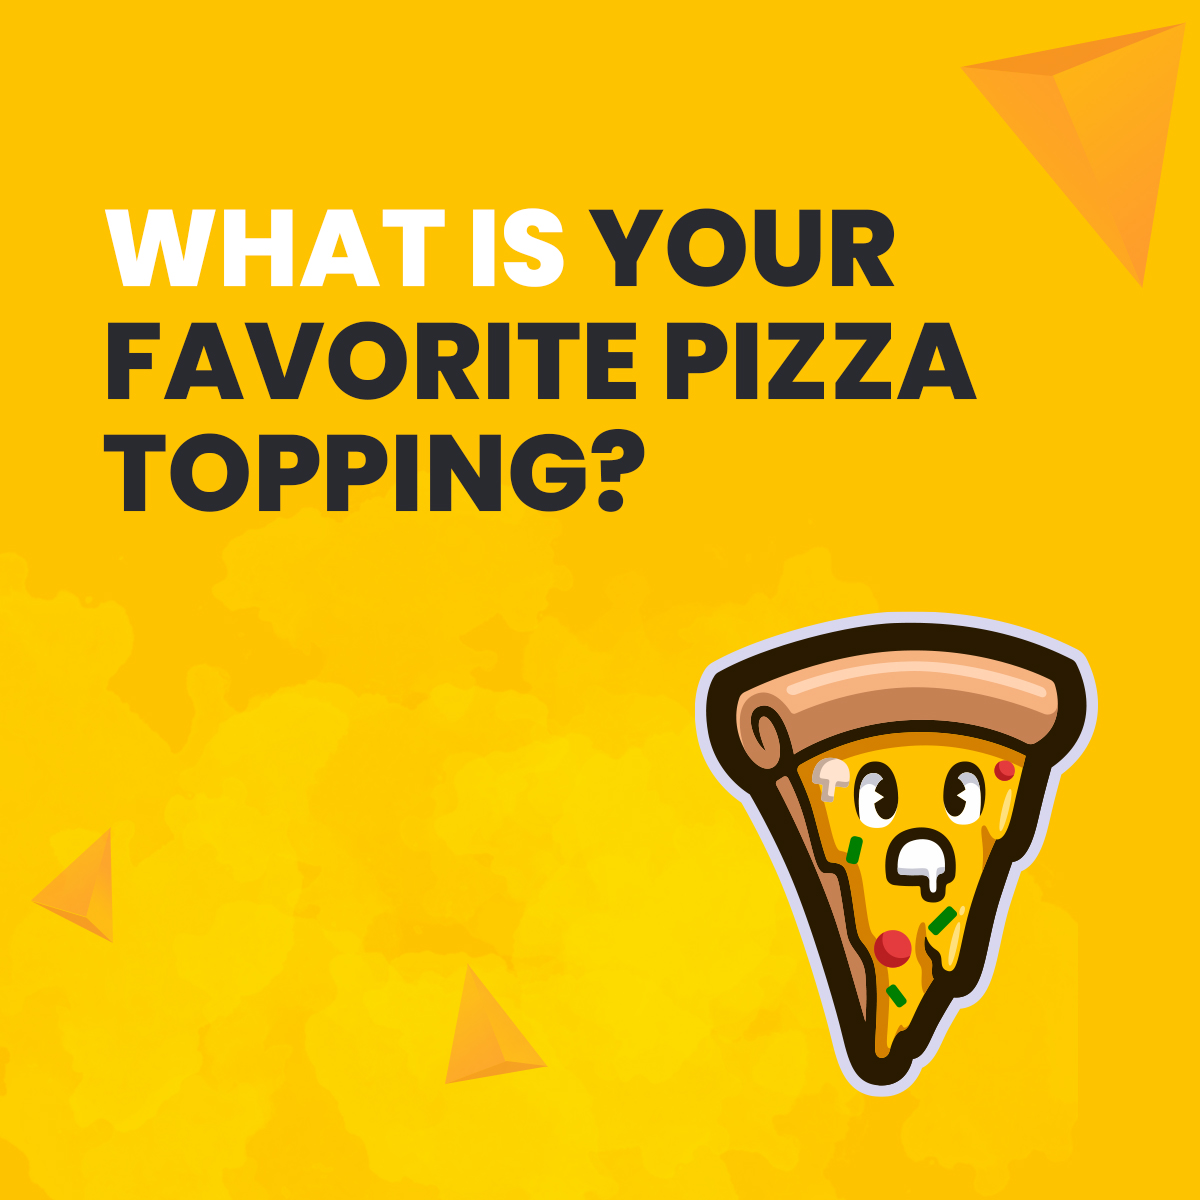 What is your favorite pizza topping? Let me know in the comments.

#favoritething #love #travel #photography #beautiful